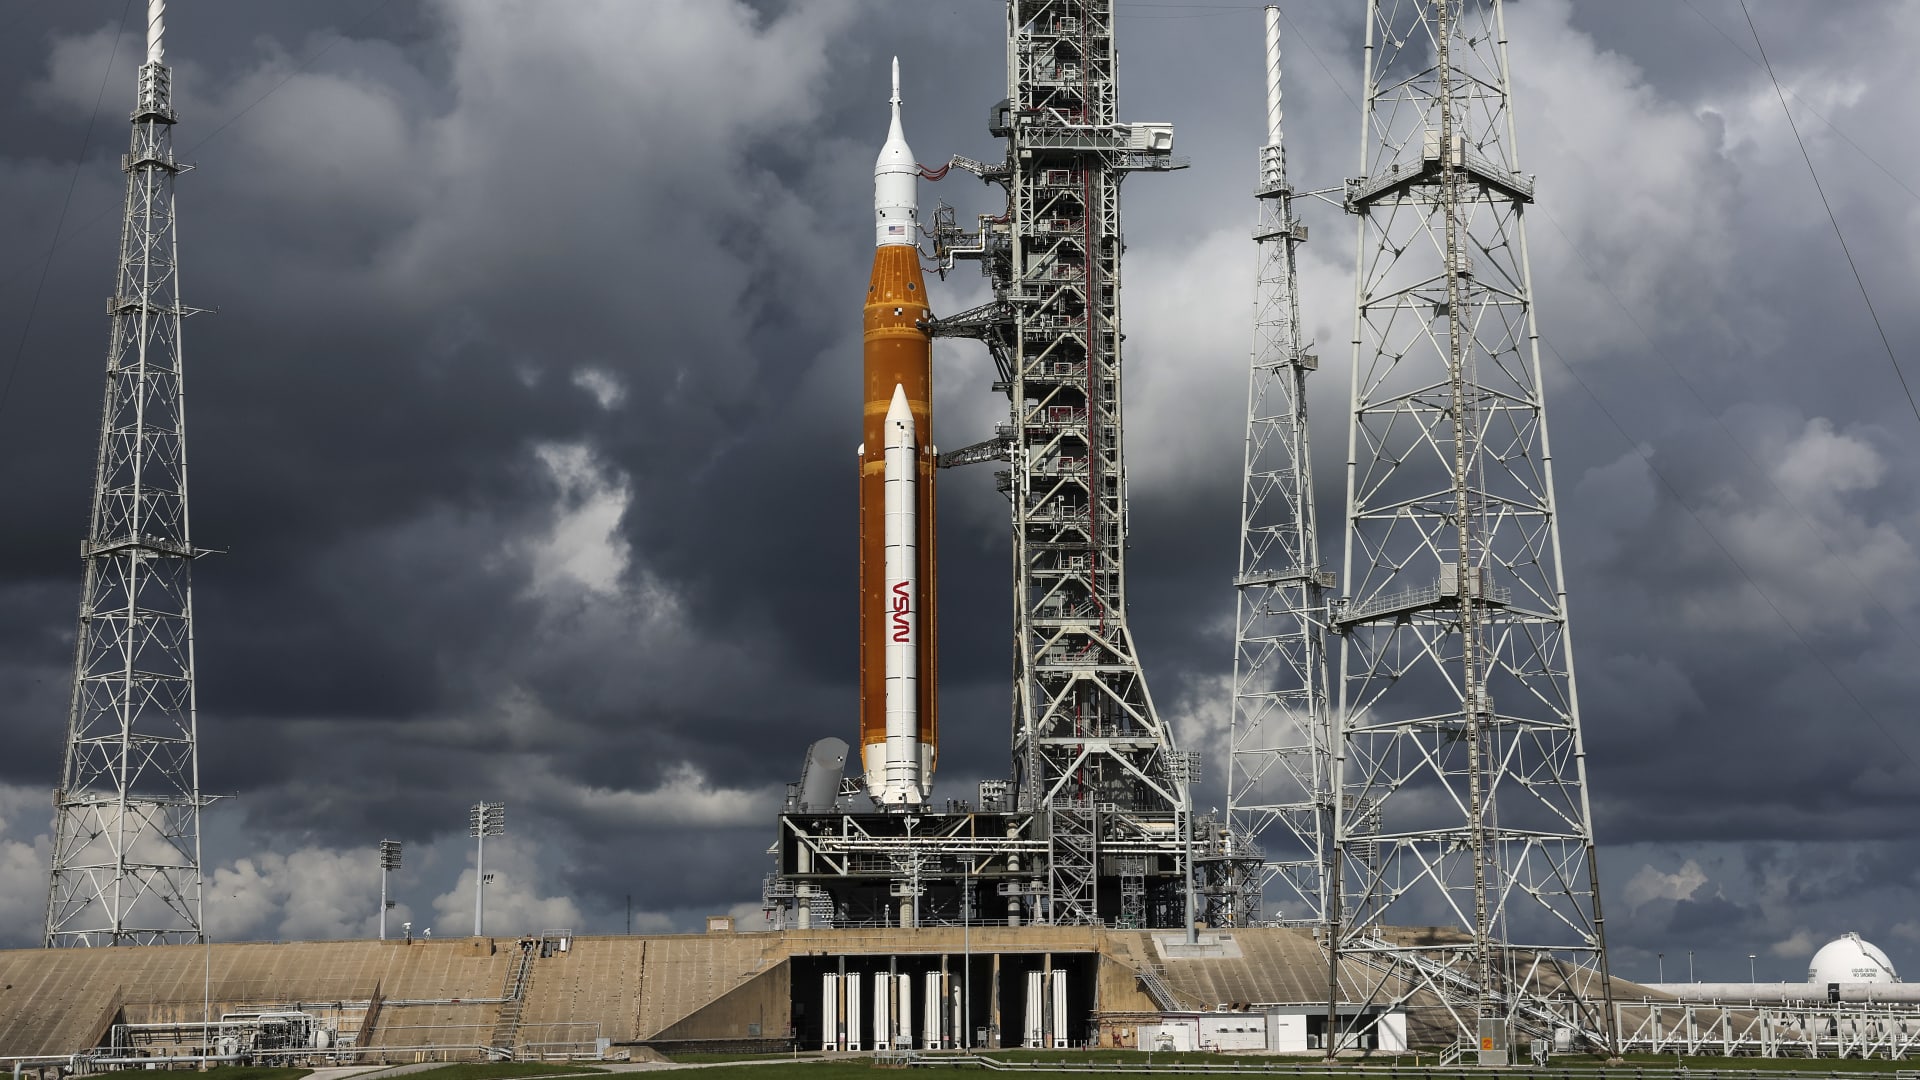 NASA working to repair fuel leak on moon rocket and plans to launch Artemis mission later this month